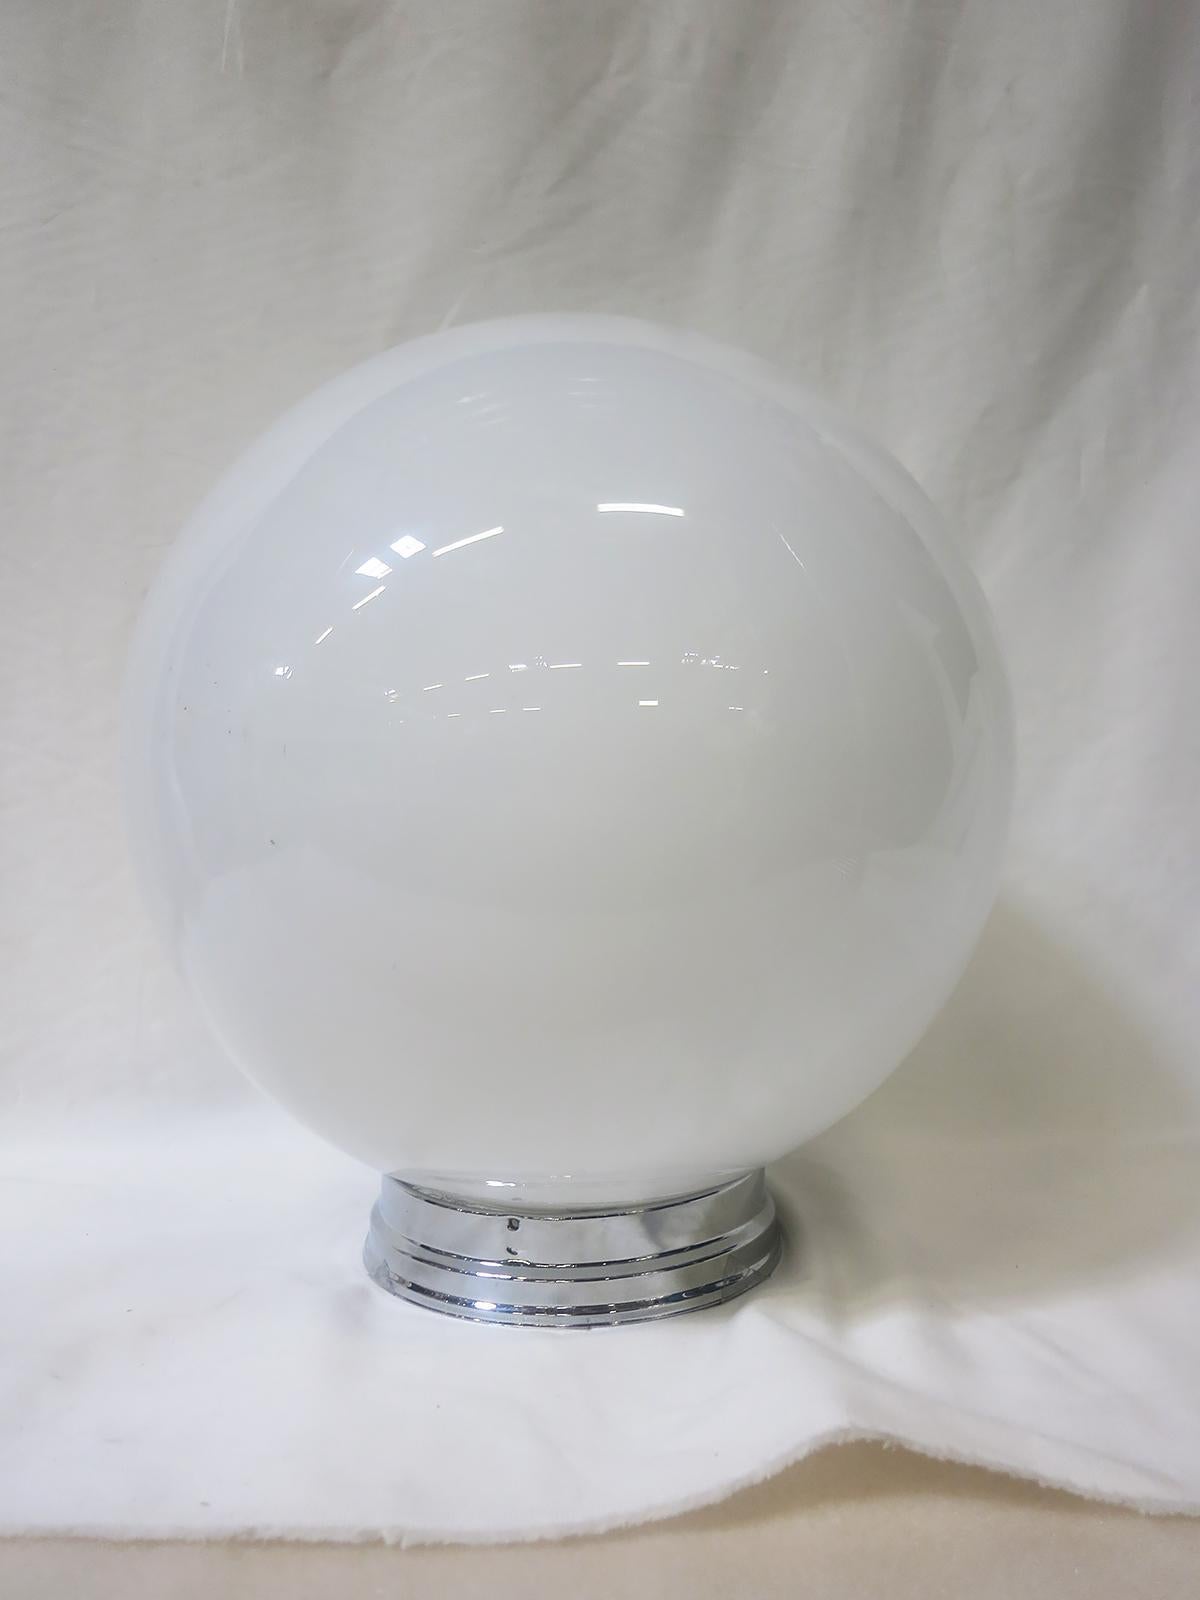 Our retro globe features a Classic sphere shape in white milk glass that will add timeless flair to any room in your home. Available with a new brass or chrome 6